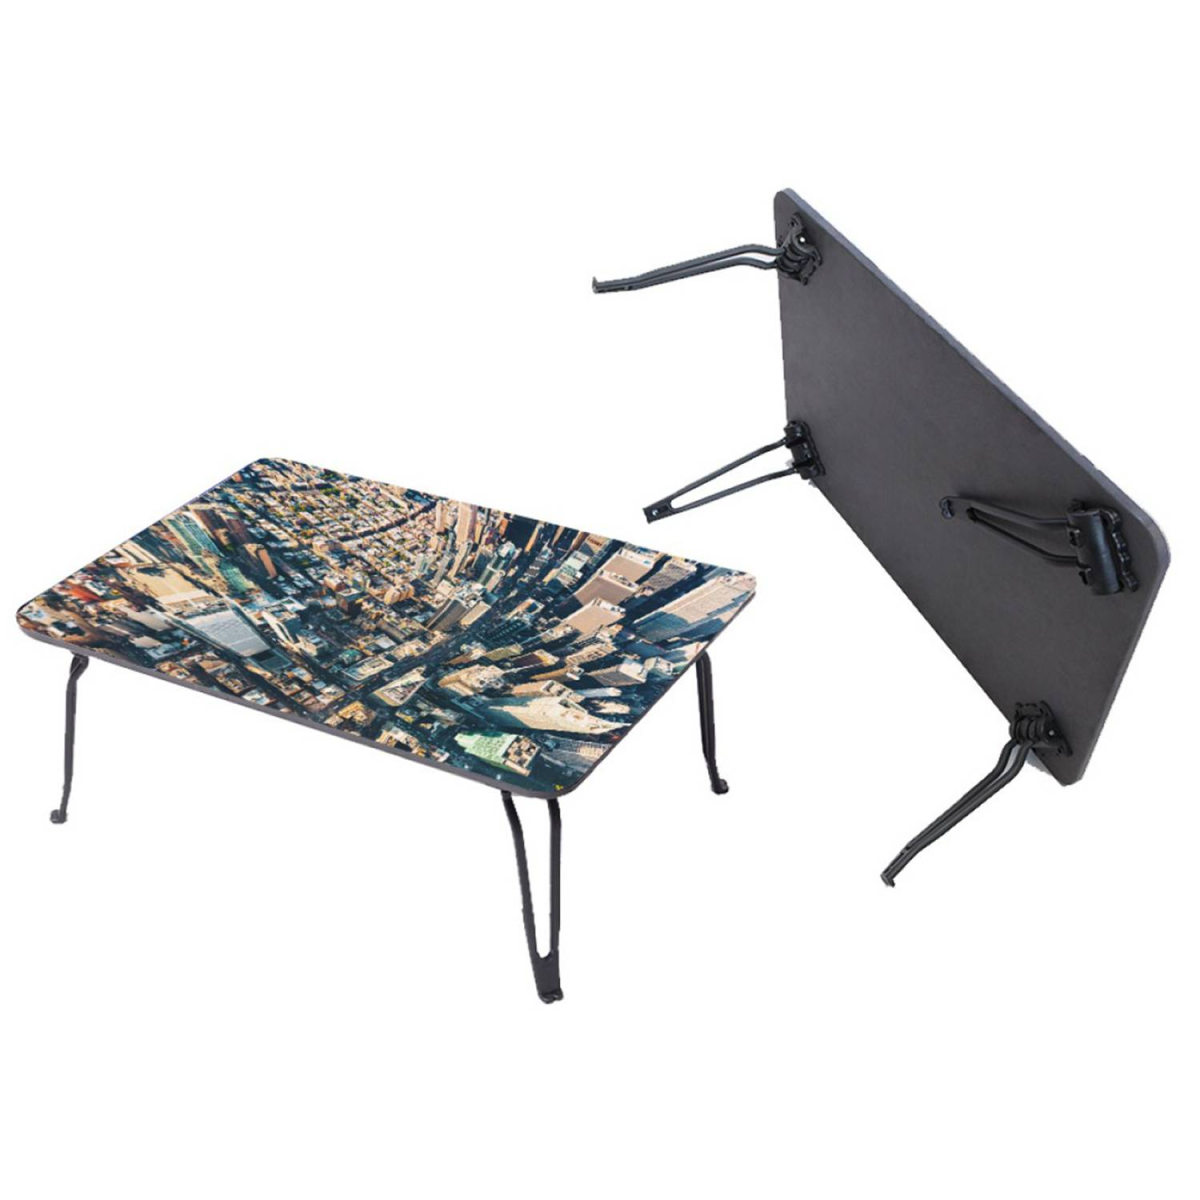 Foldable Wall Art Table - URBAN CITY EDITION ft. Getty Image